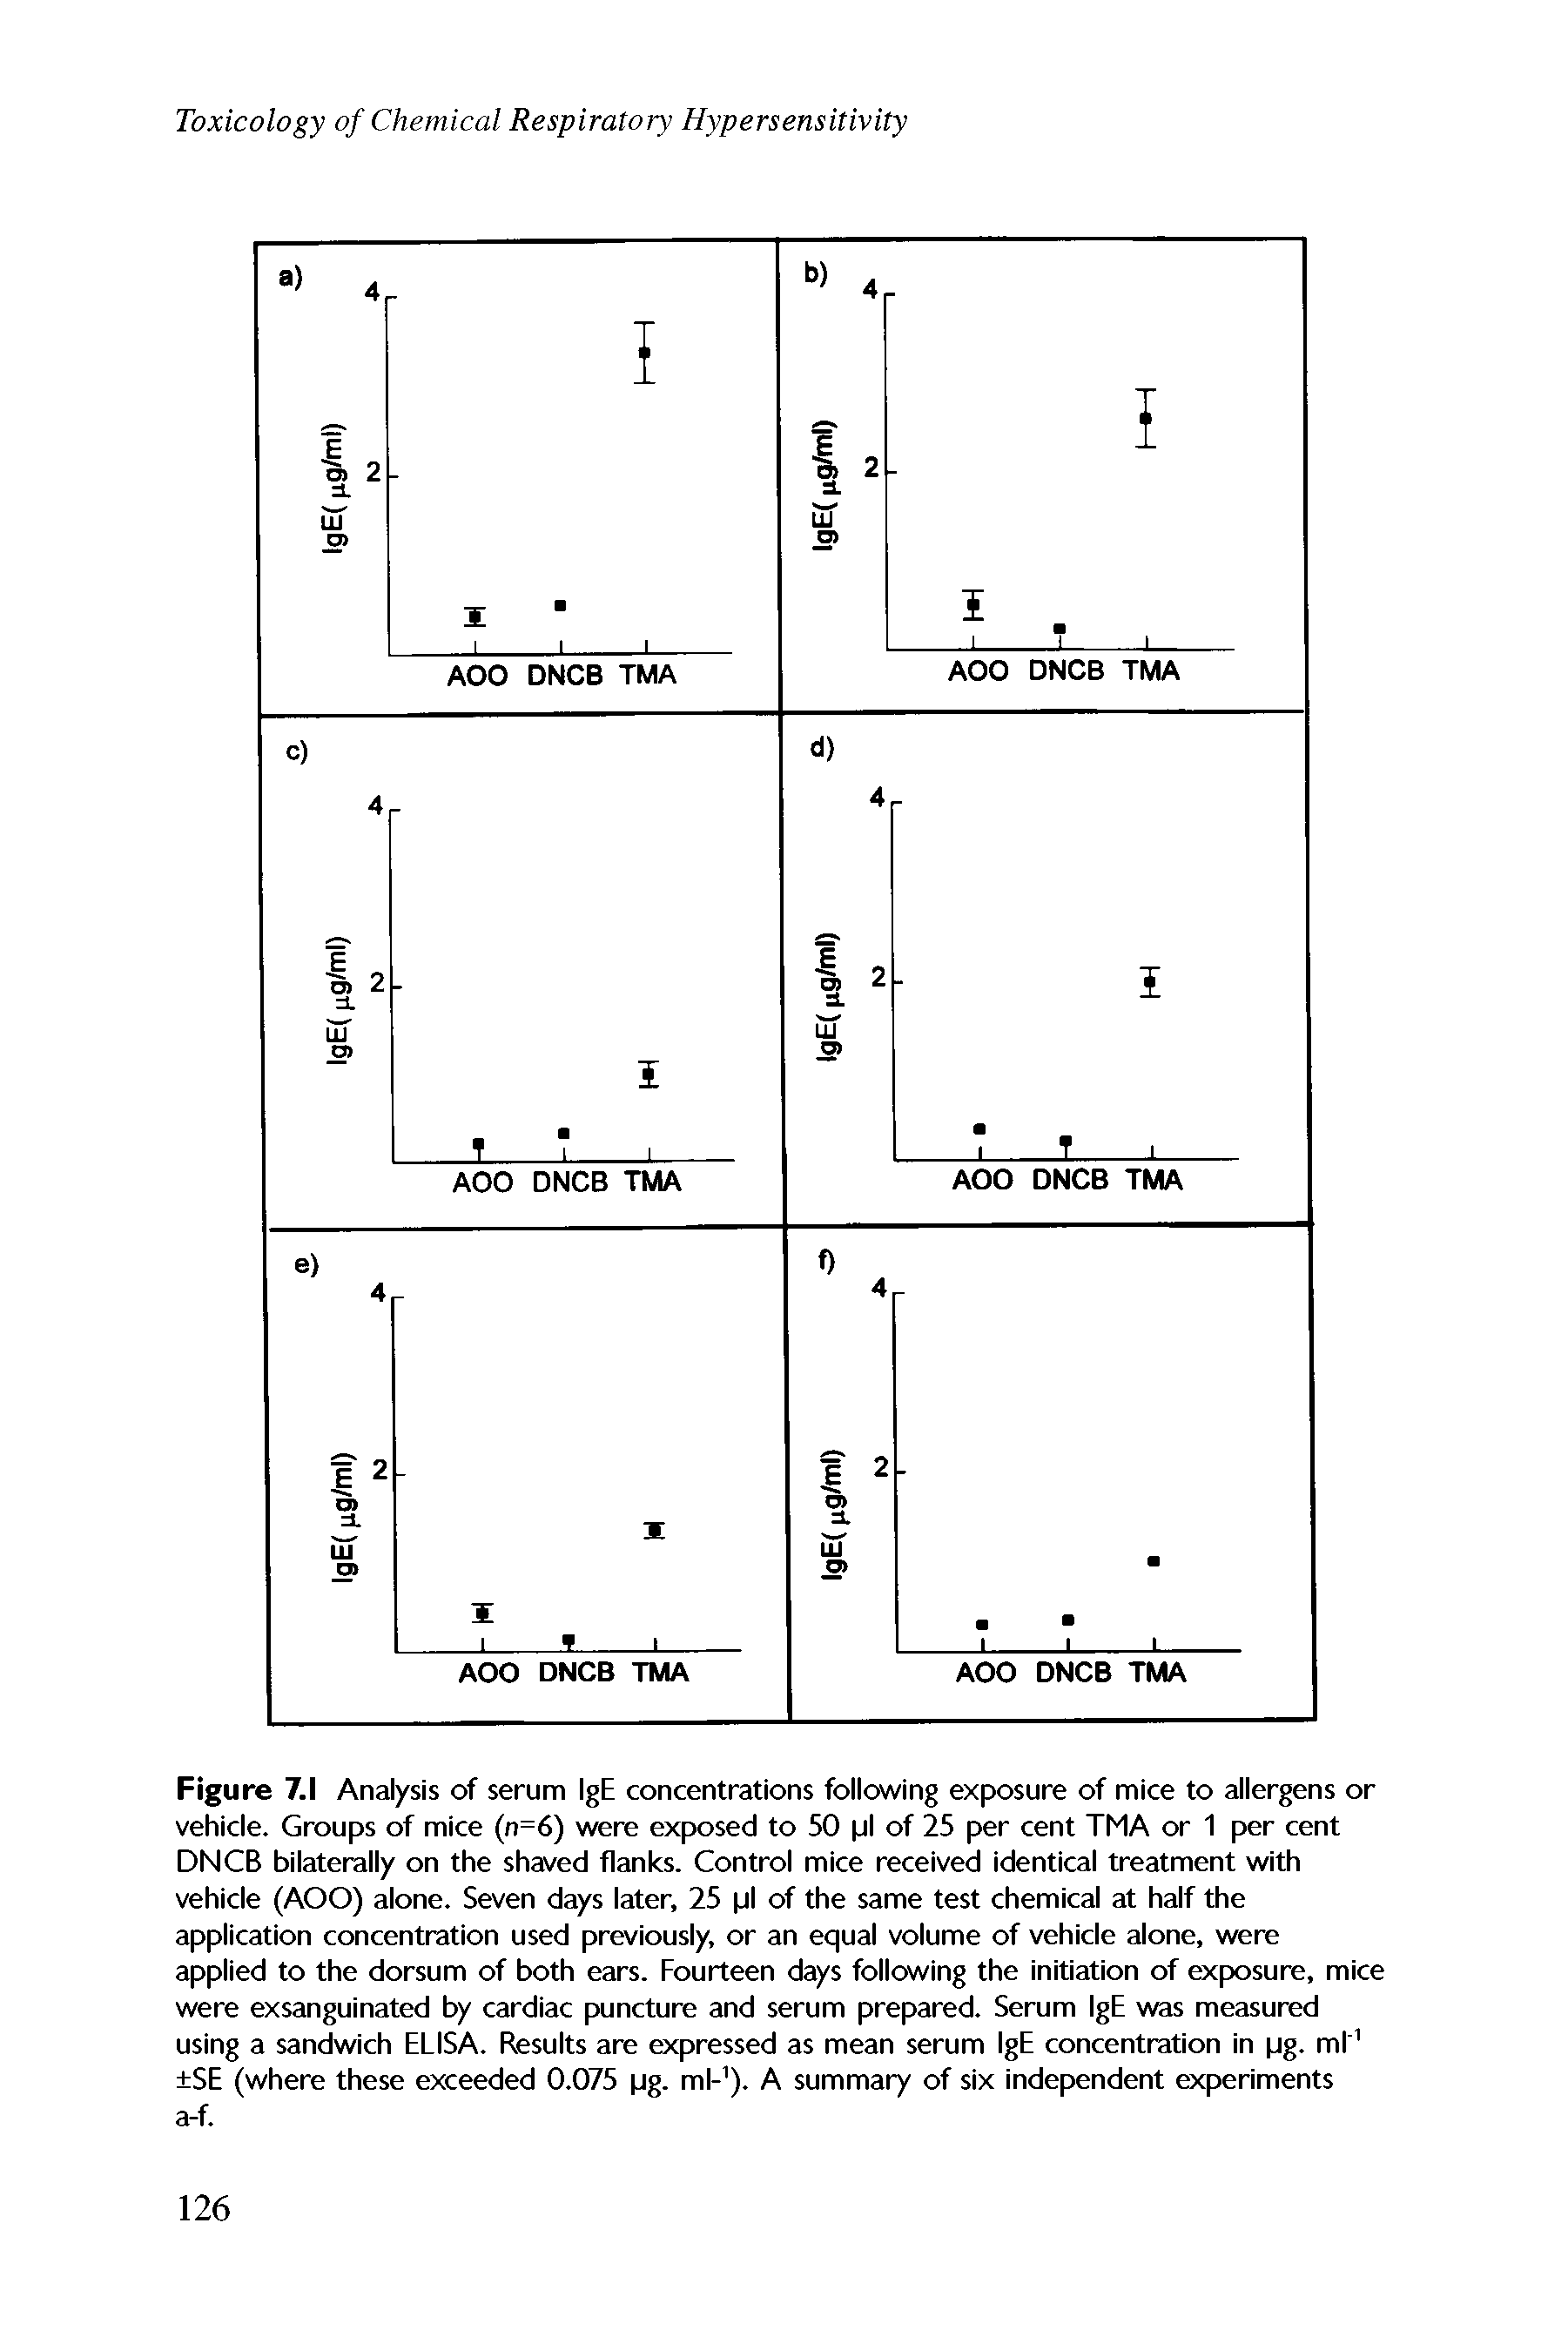 Figure 7.1 Analysis of serum IgE concentrations following exposure of mice to allergens or vehicle. Groups of mice (n=6) were exposed to 50 pi of 25 per cent TMA or 1 per cent DNCB bilaterally on the shaved flanks. Control mice received identical treatment with vehicle (AOO) alone. Seven days later, 25 pi of the same test chemical at half the application concentration used previously, or an equal volume of vehicle alone, were applied to the dorsum of both ears. Fourteen days following the initiation of exposure, mice were exsanguinated by cardiac puncture and serum prepared. Serum IgE was measured using a sandwich ELISA. Results are expressed as mean serum IgE concentration in pg. ml 1 SE (where these exceeded 0.075 pg. ml-1). A summary of six independent experiments a-f.